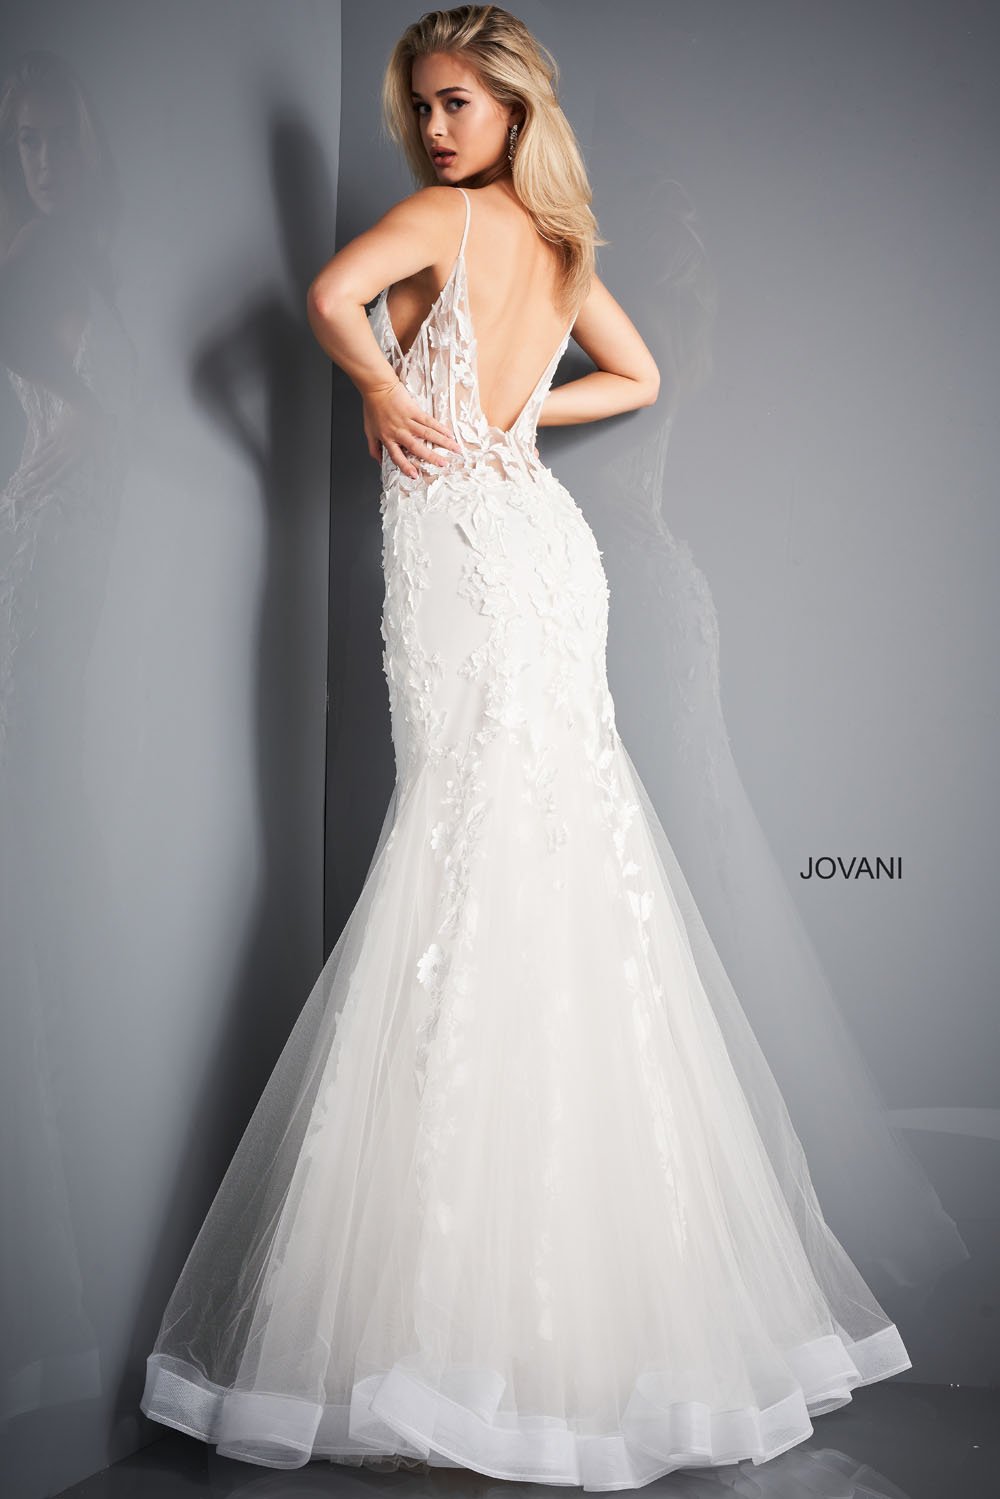 Jovani 02841 dress images in these colors: Black, Dark Blush, Ivory.